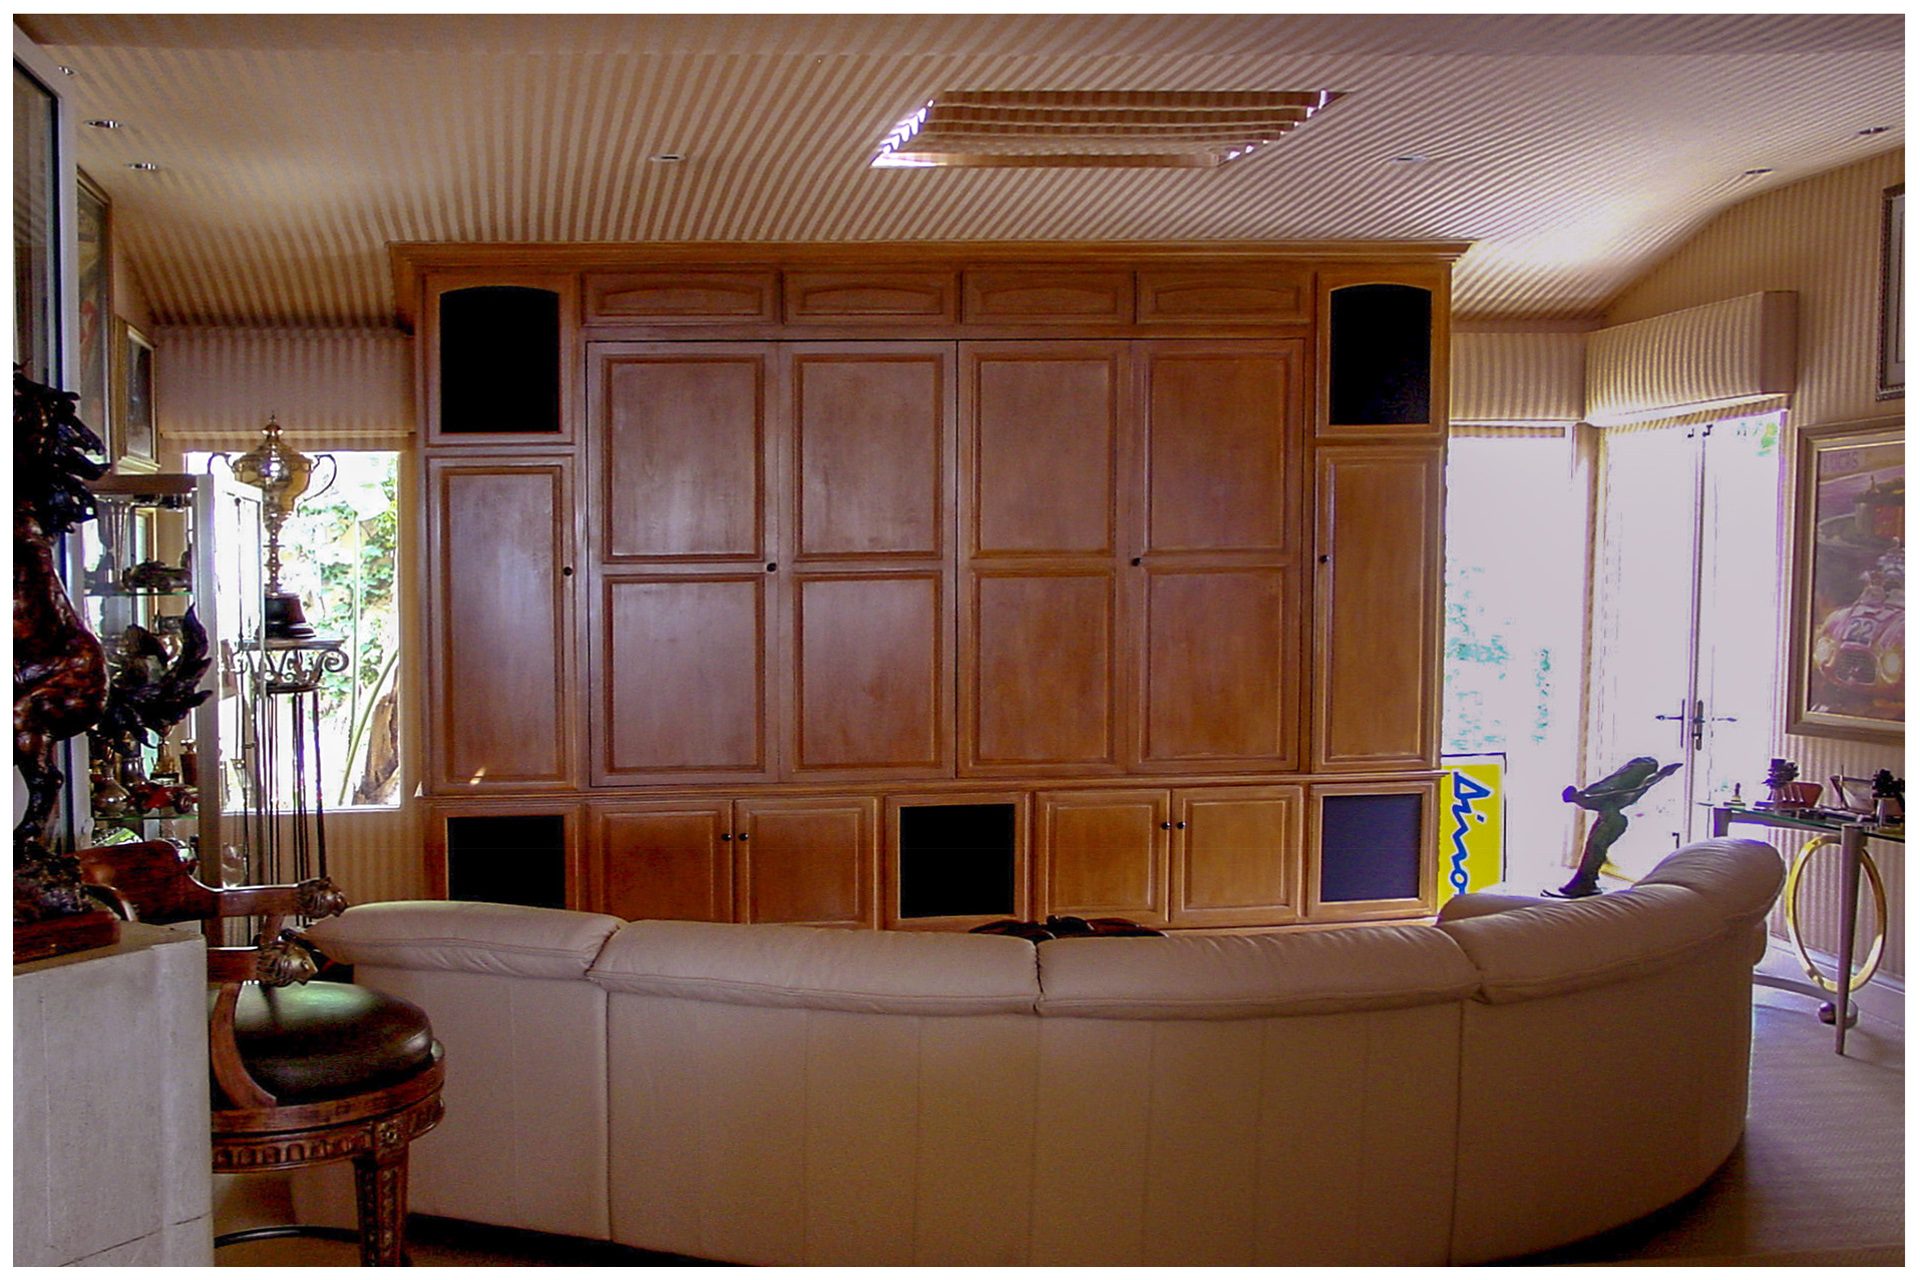 SMALL DEN THEATER All speaker elements were enclosed in the cabinet.  The projector was recessed into the ceiling.The cabinet was designed with space and wiring provisions to accommodate a future upgrade to a large LED screen behind a drop down screen for daytime viewing.